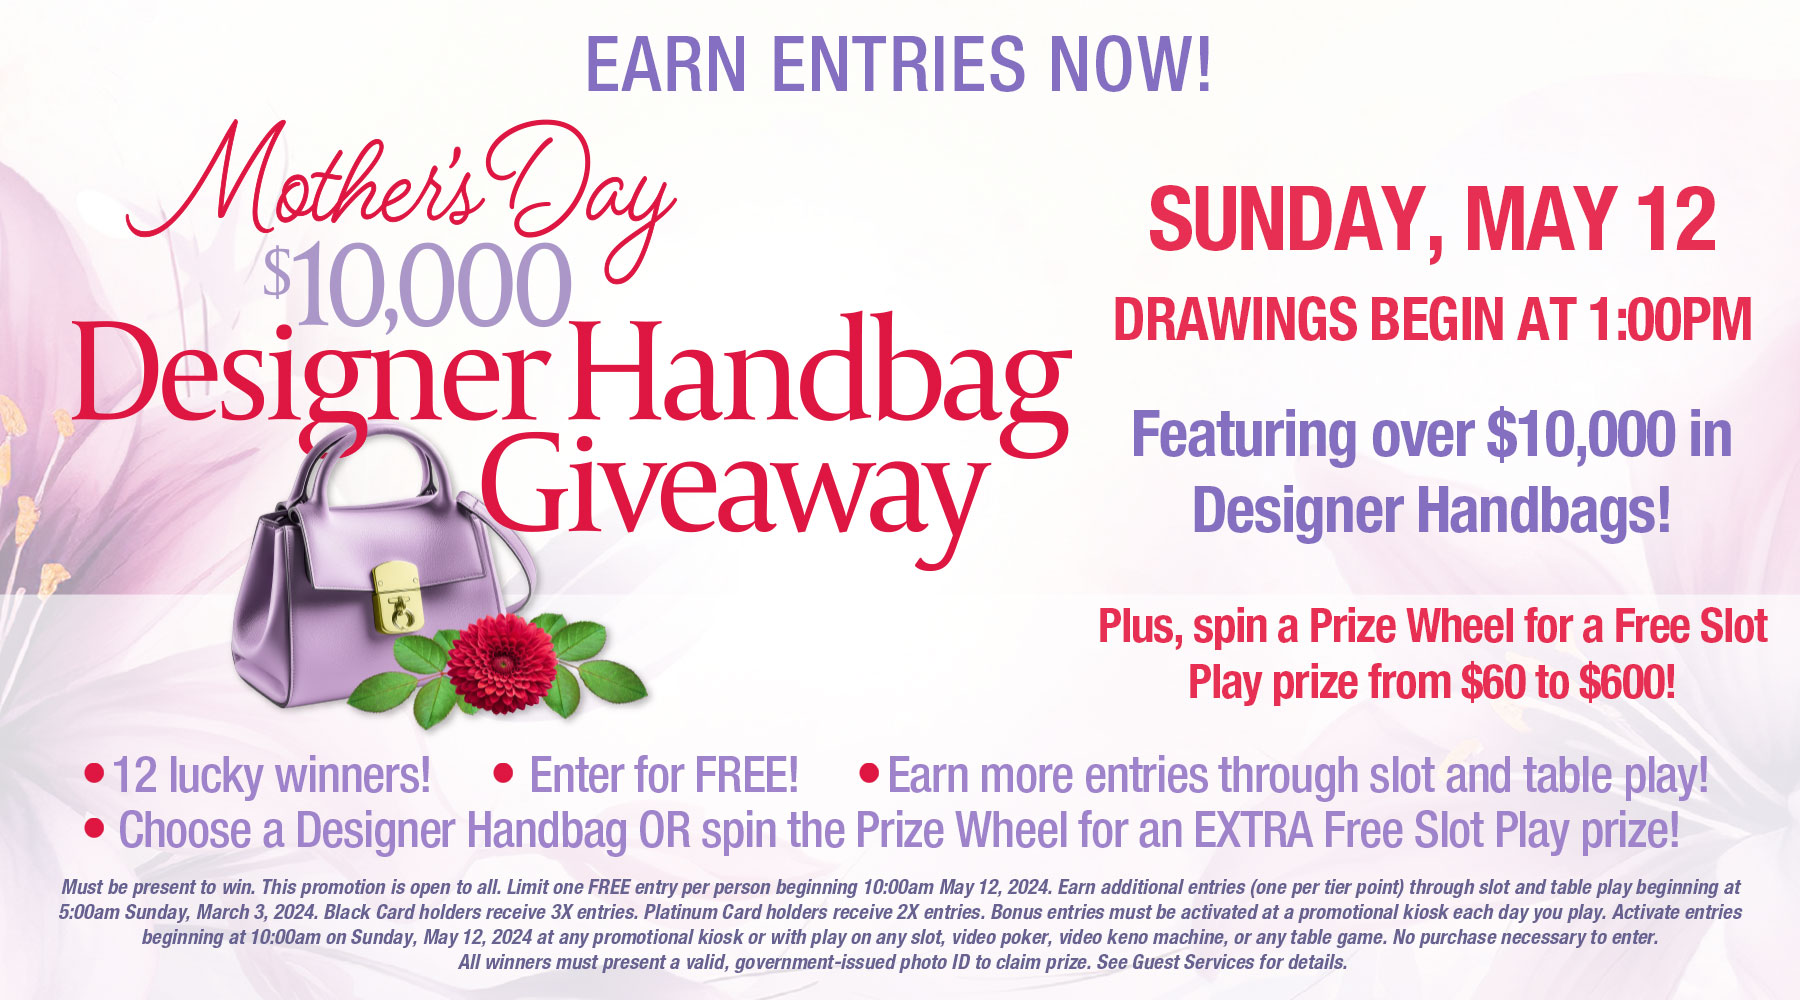 Mothers day at Oxford Casino Hotel - Earn entries now